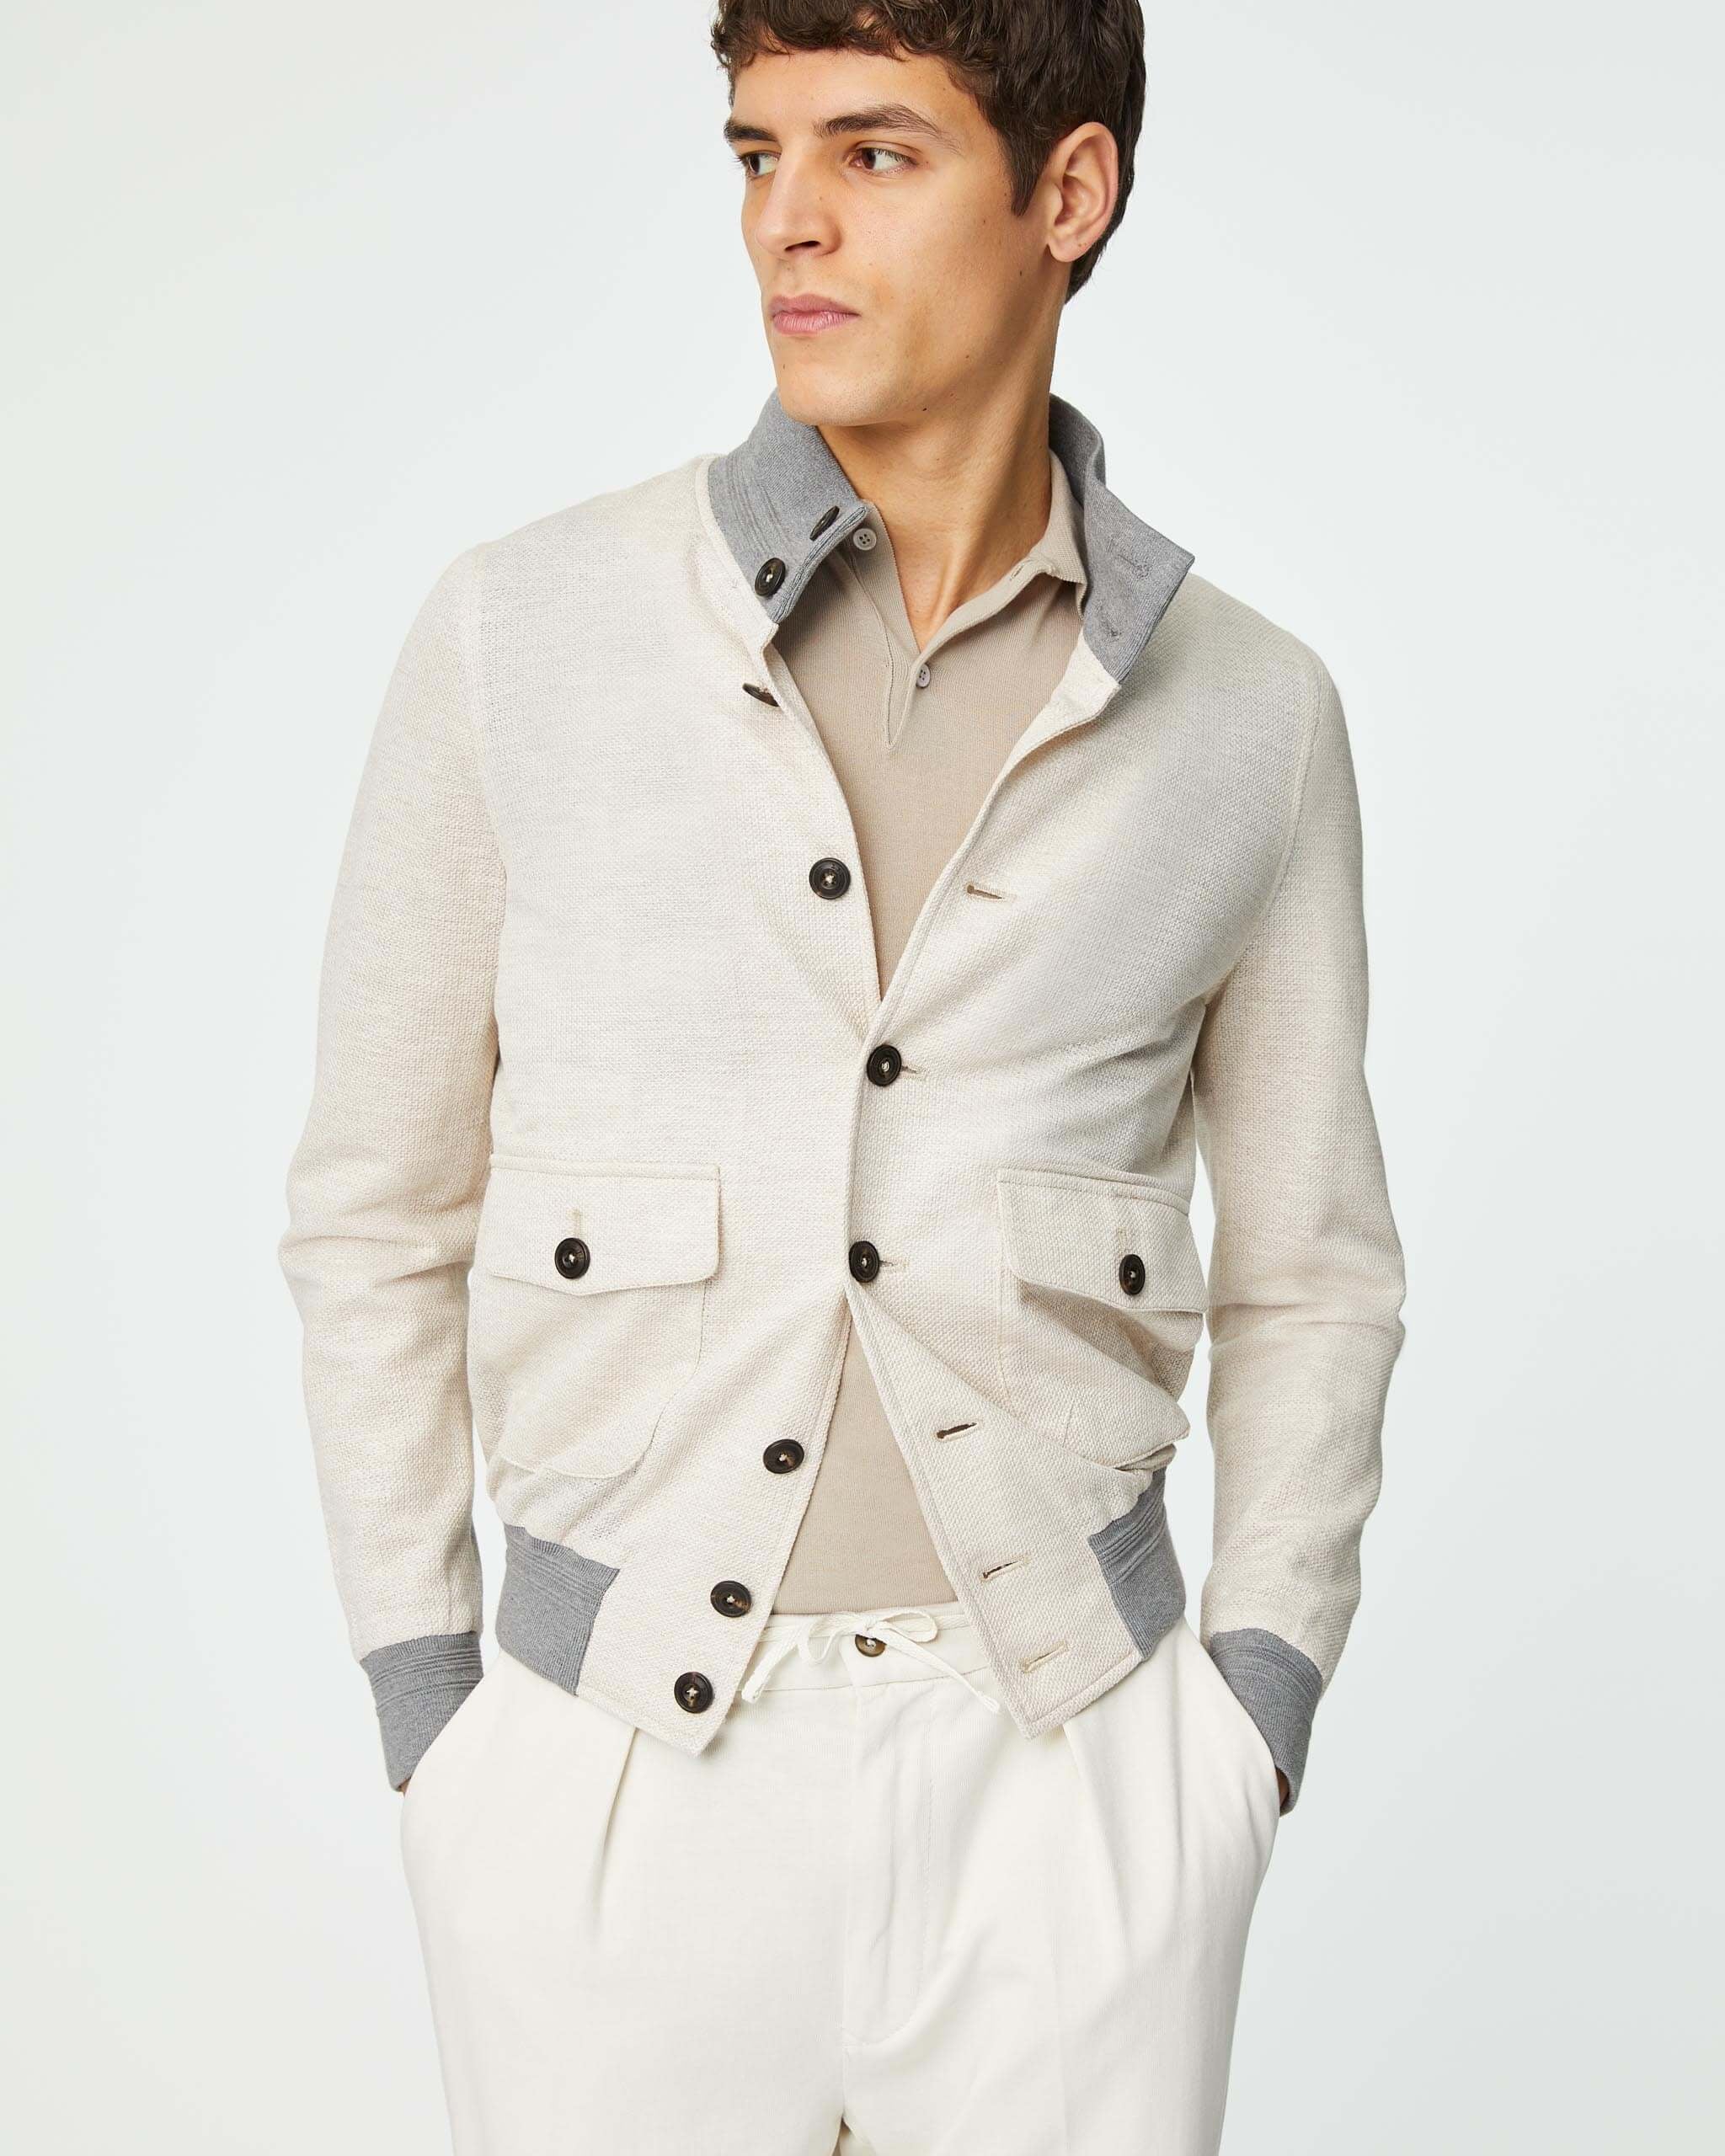 Bomber Jacket in White Jersey - Men's Casual Jacket at Menzclub